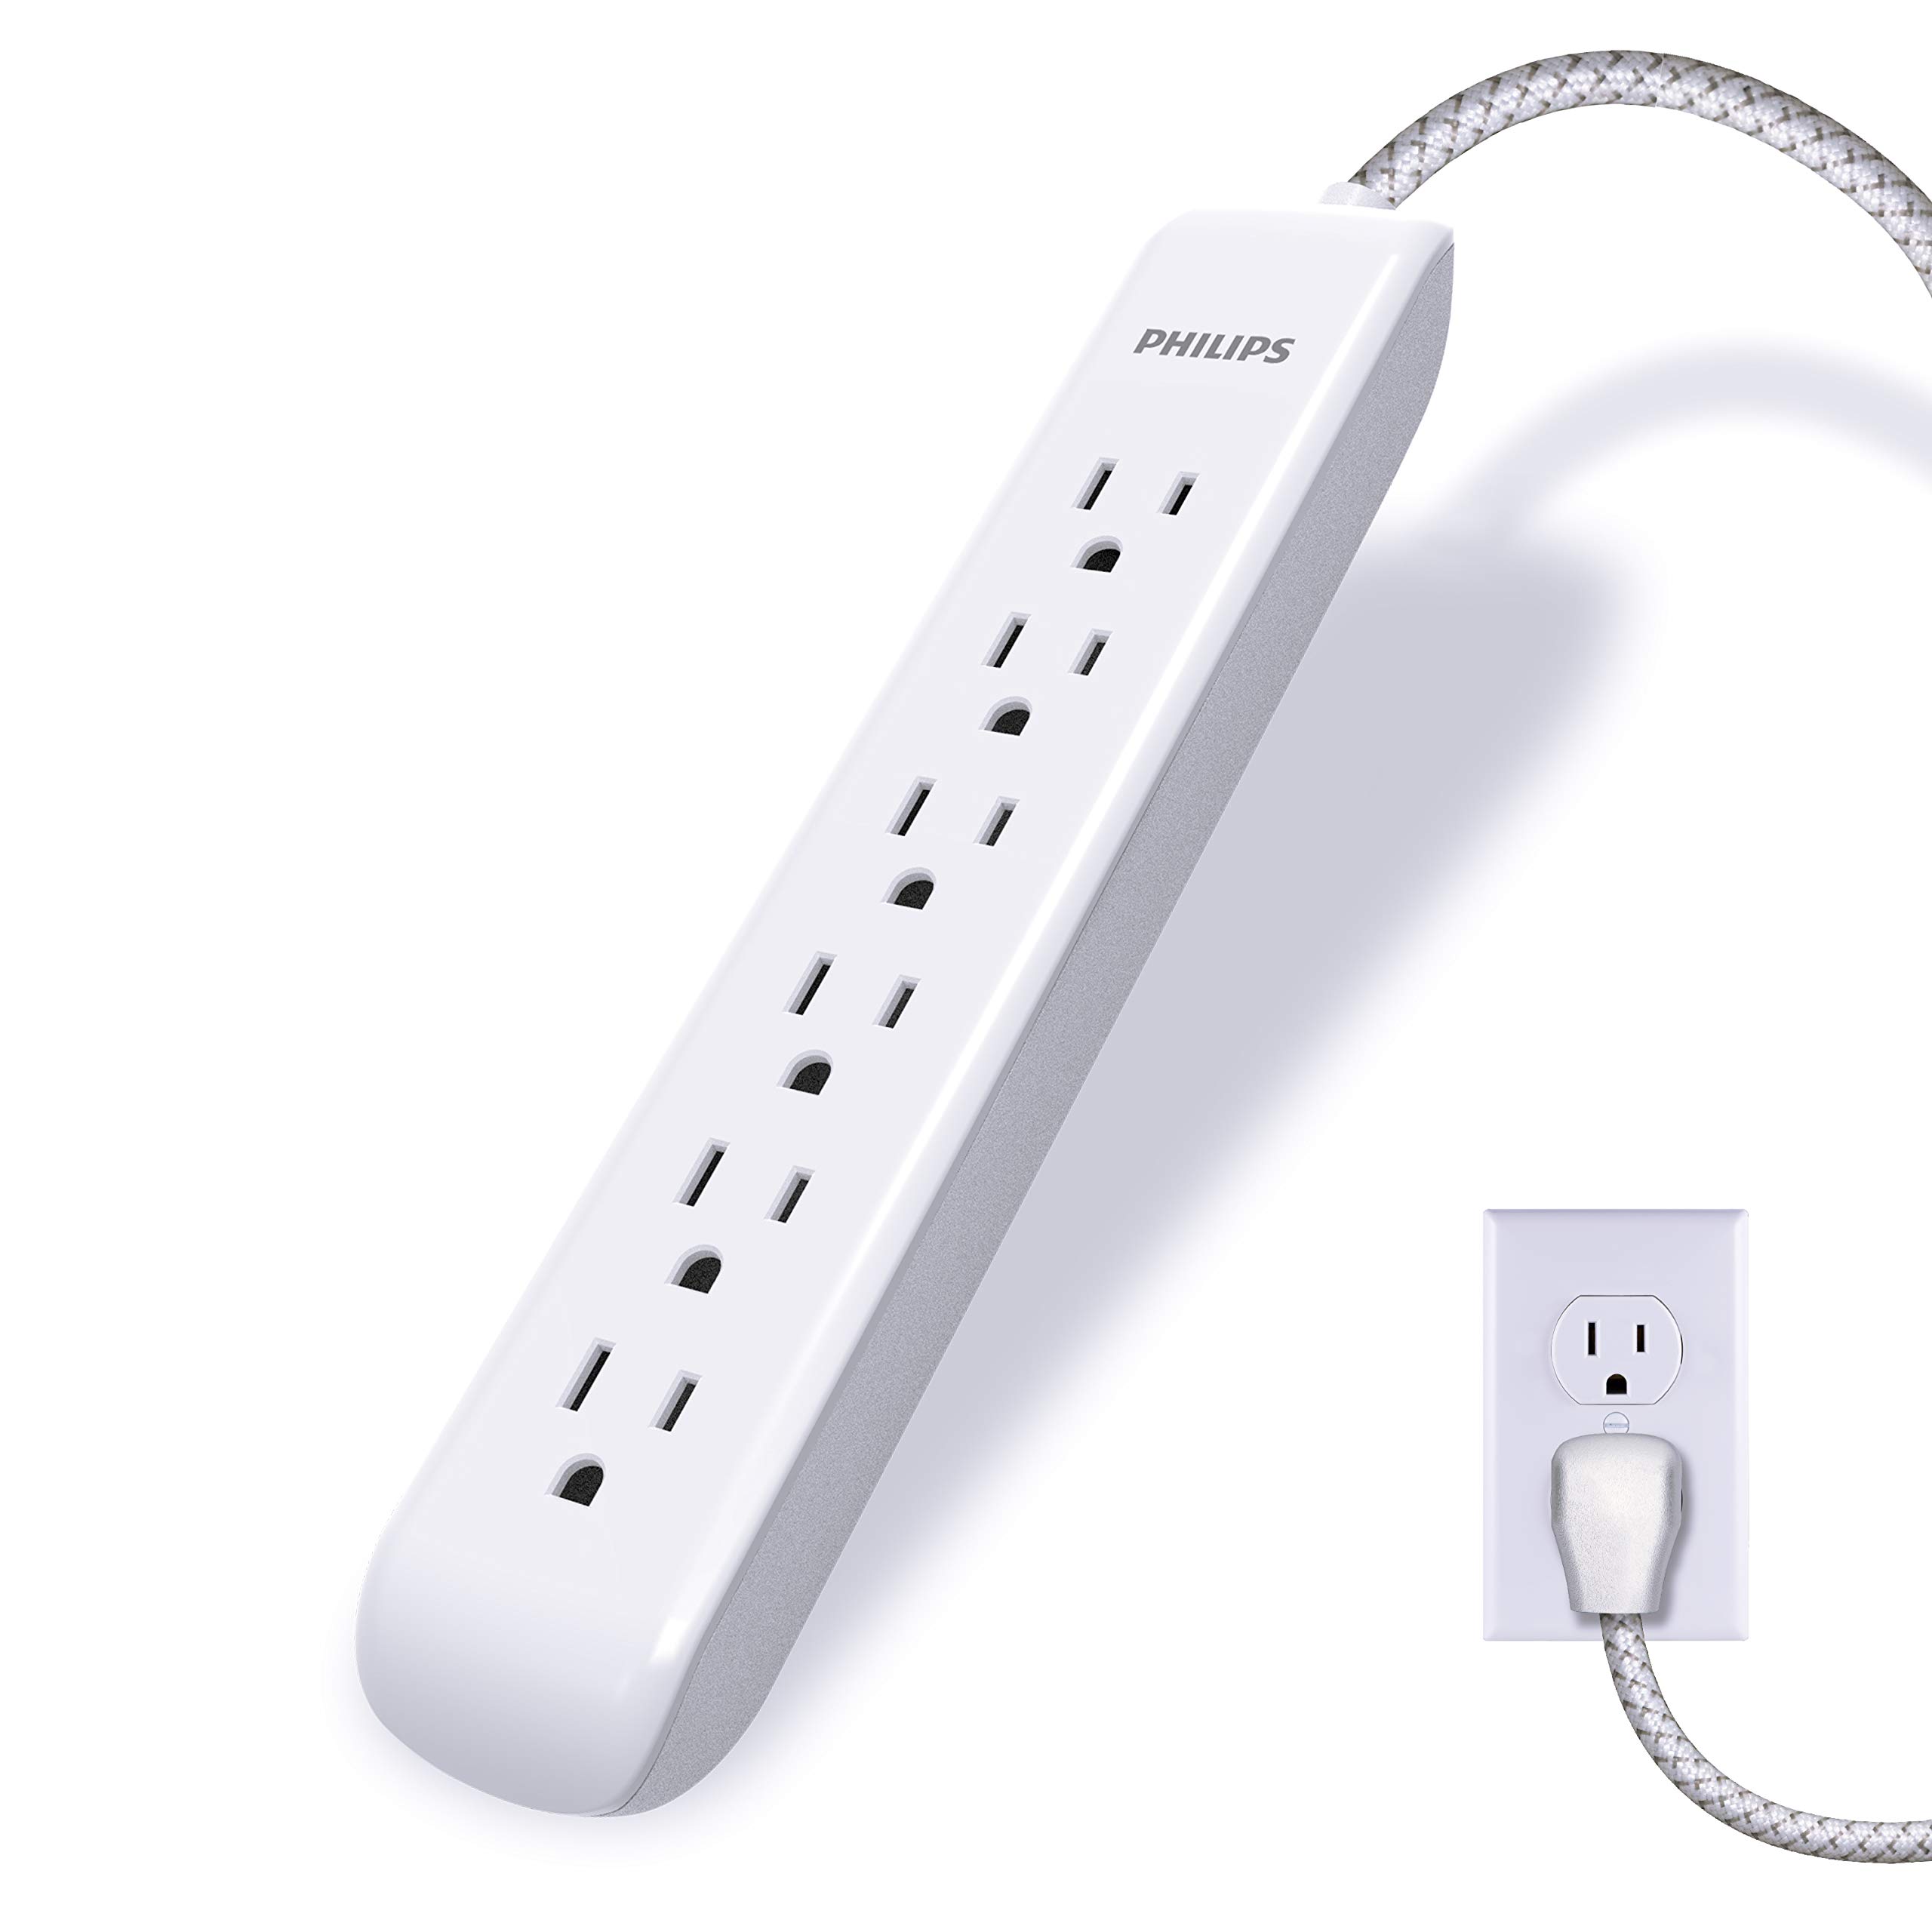 4' Philips 6 Outlet Surge Protector Power Strip w/ Designer Braided Power Cord & Flat Plug Extension (White) $7 + Free Shipping w/ Walmart+ or $35+